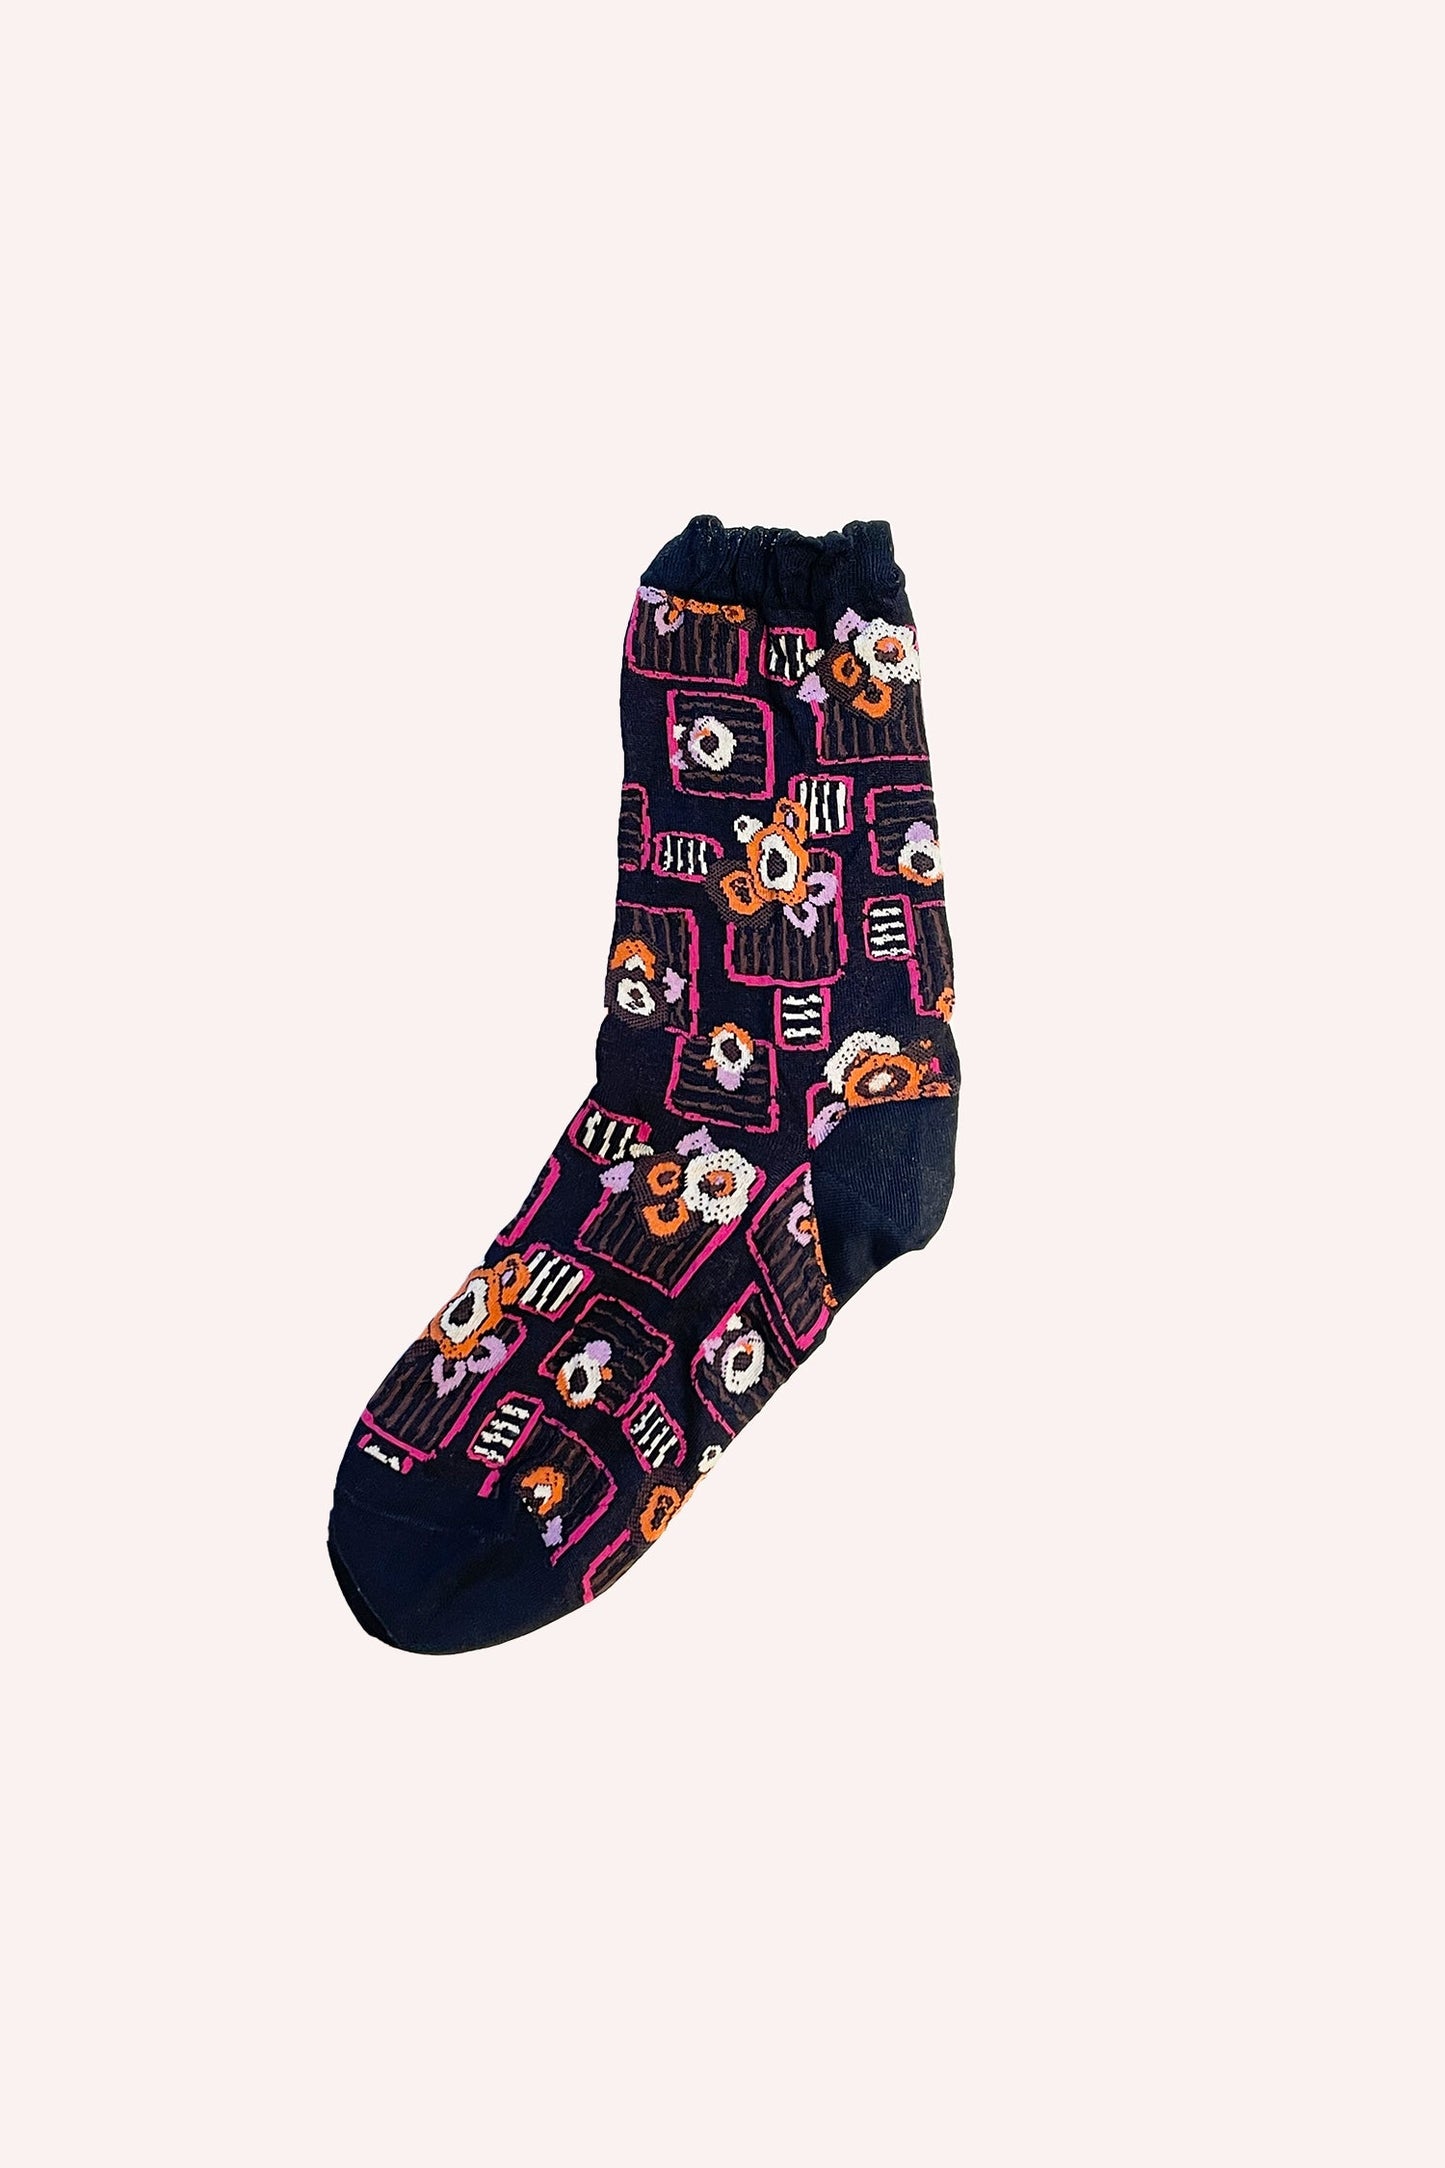 Deco Floral Patch Socks on a black background, orange floral design in small square in pink